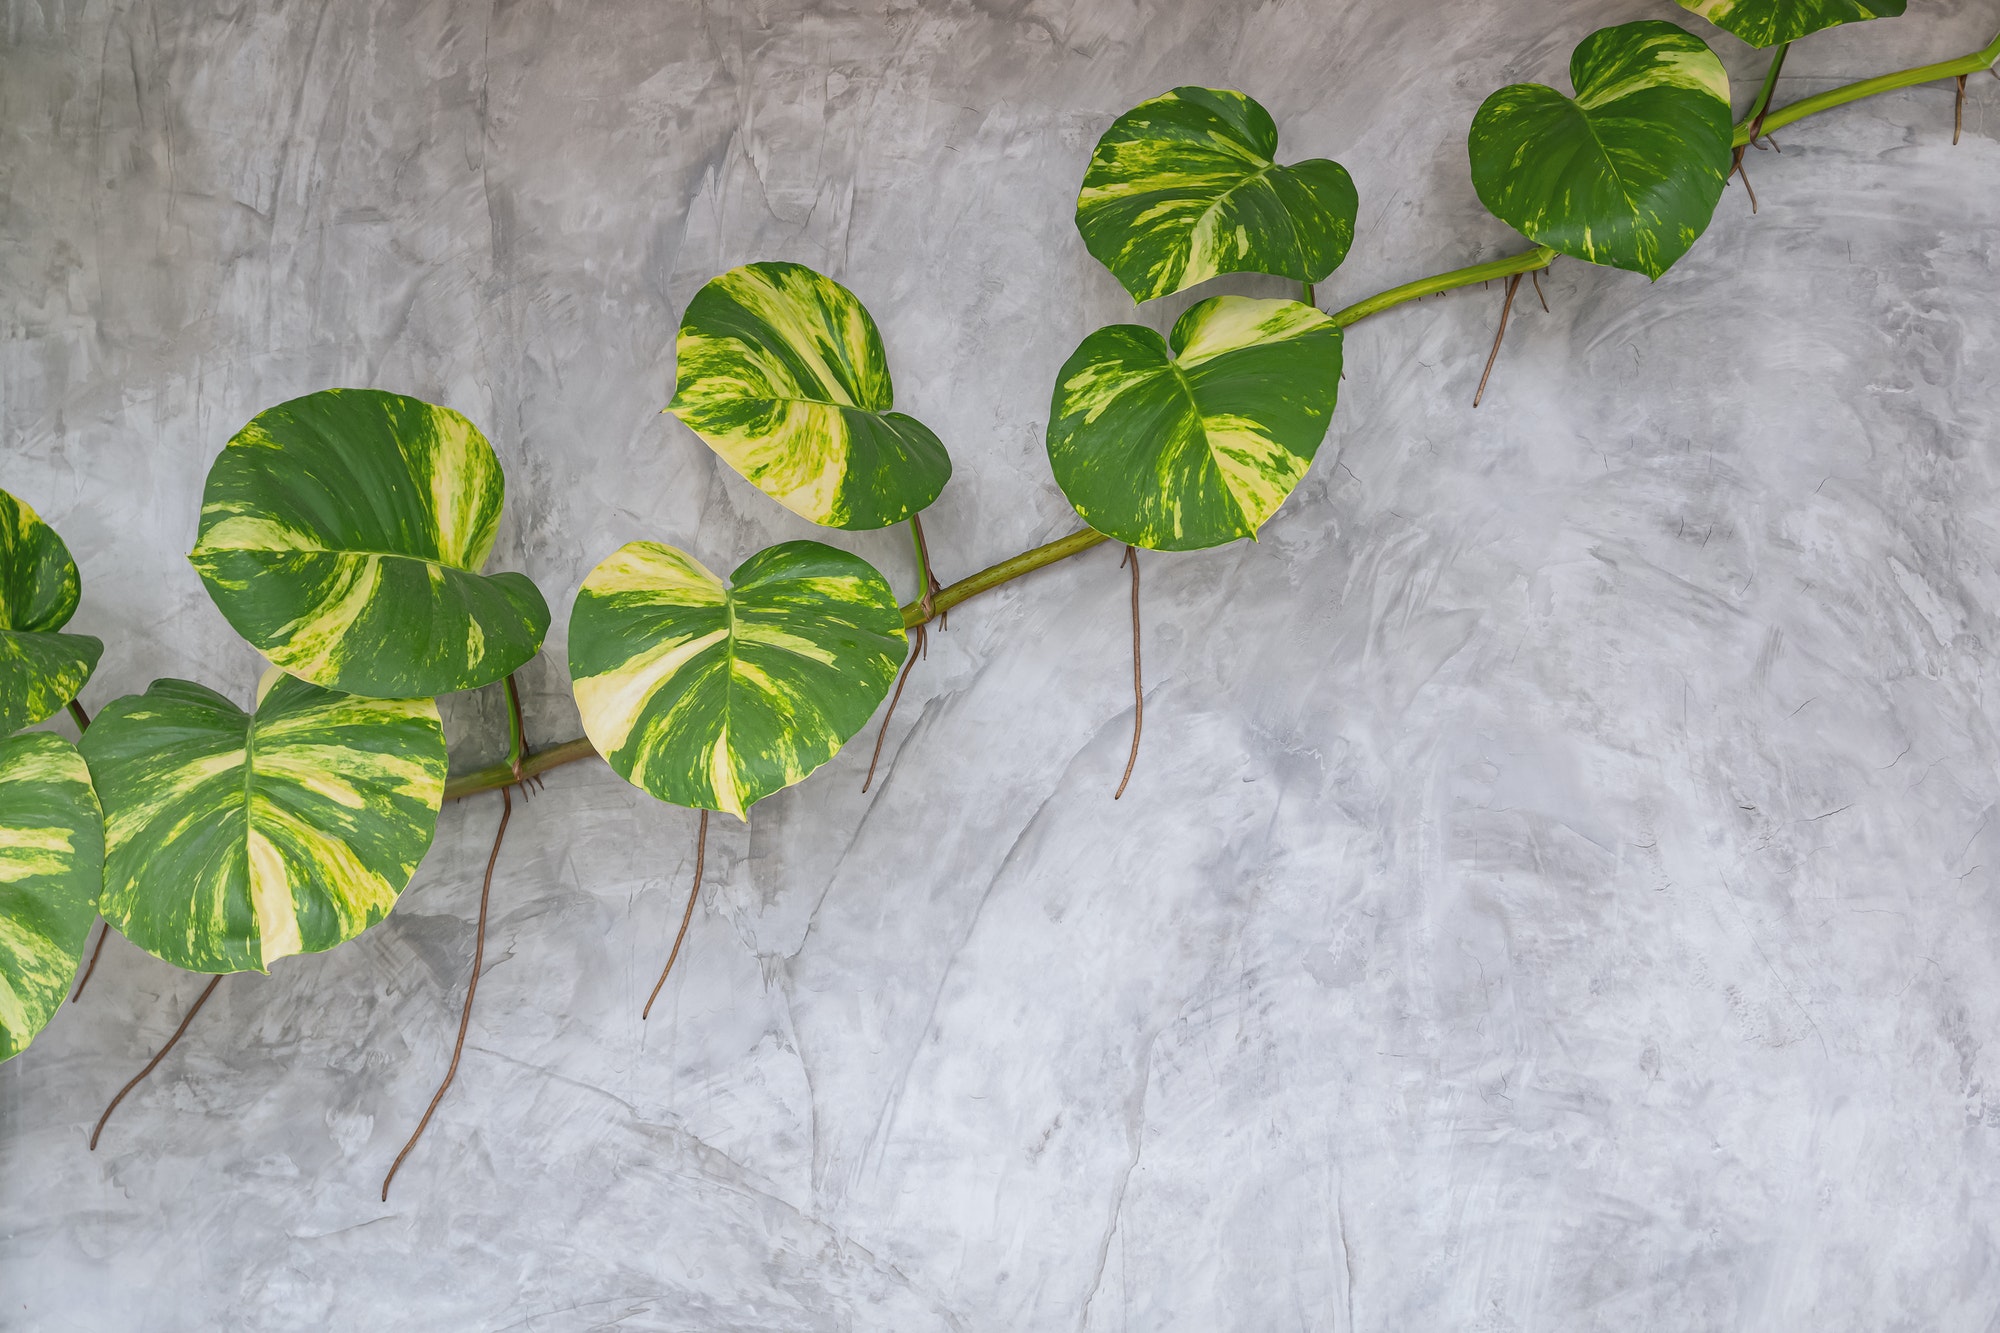 Green giant Devil's ivy plant are growing on surface of loft concrete wall background